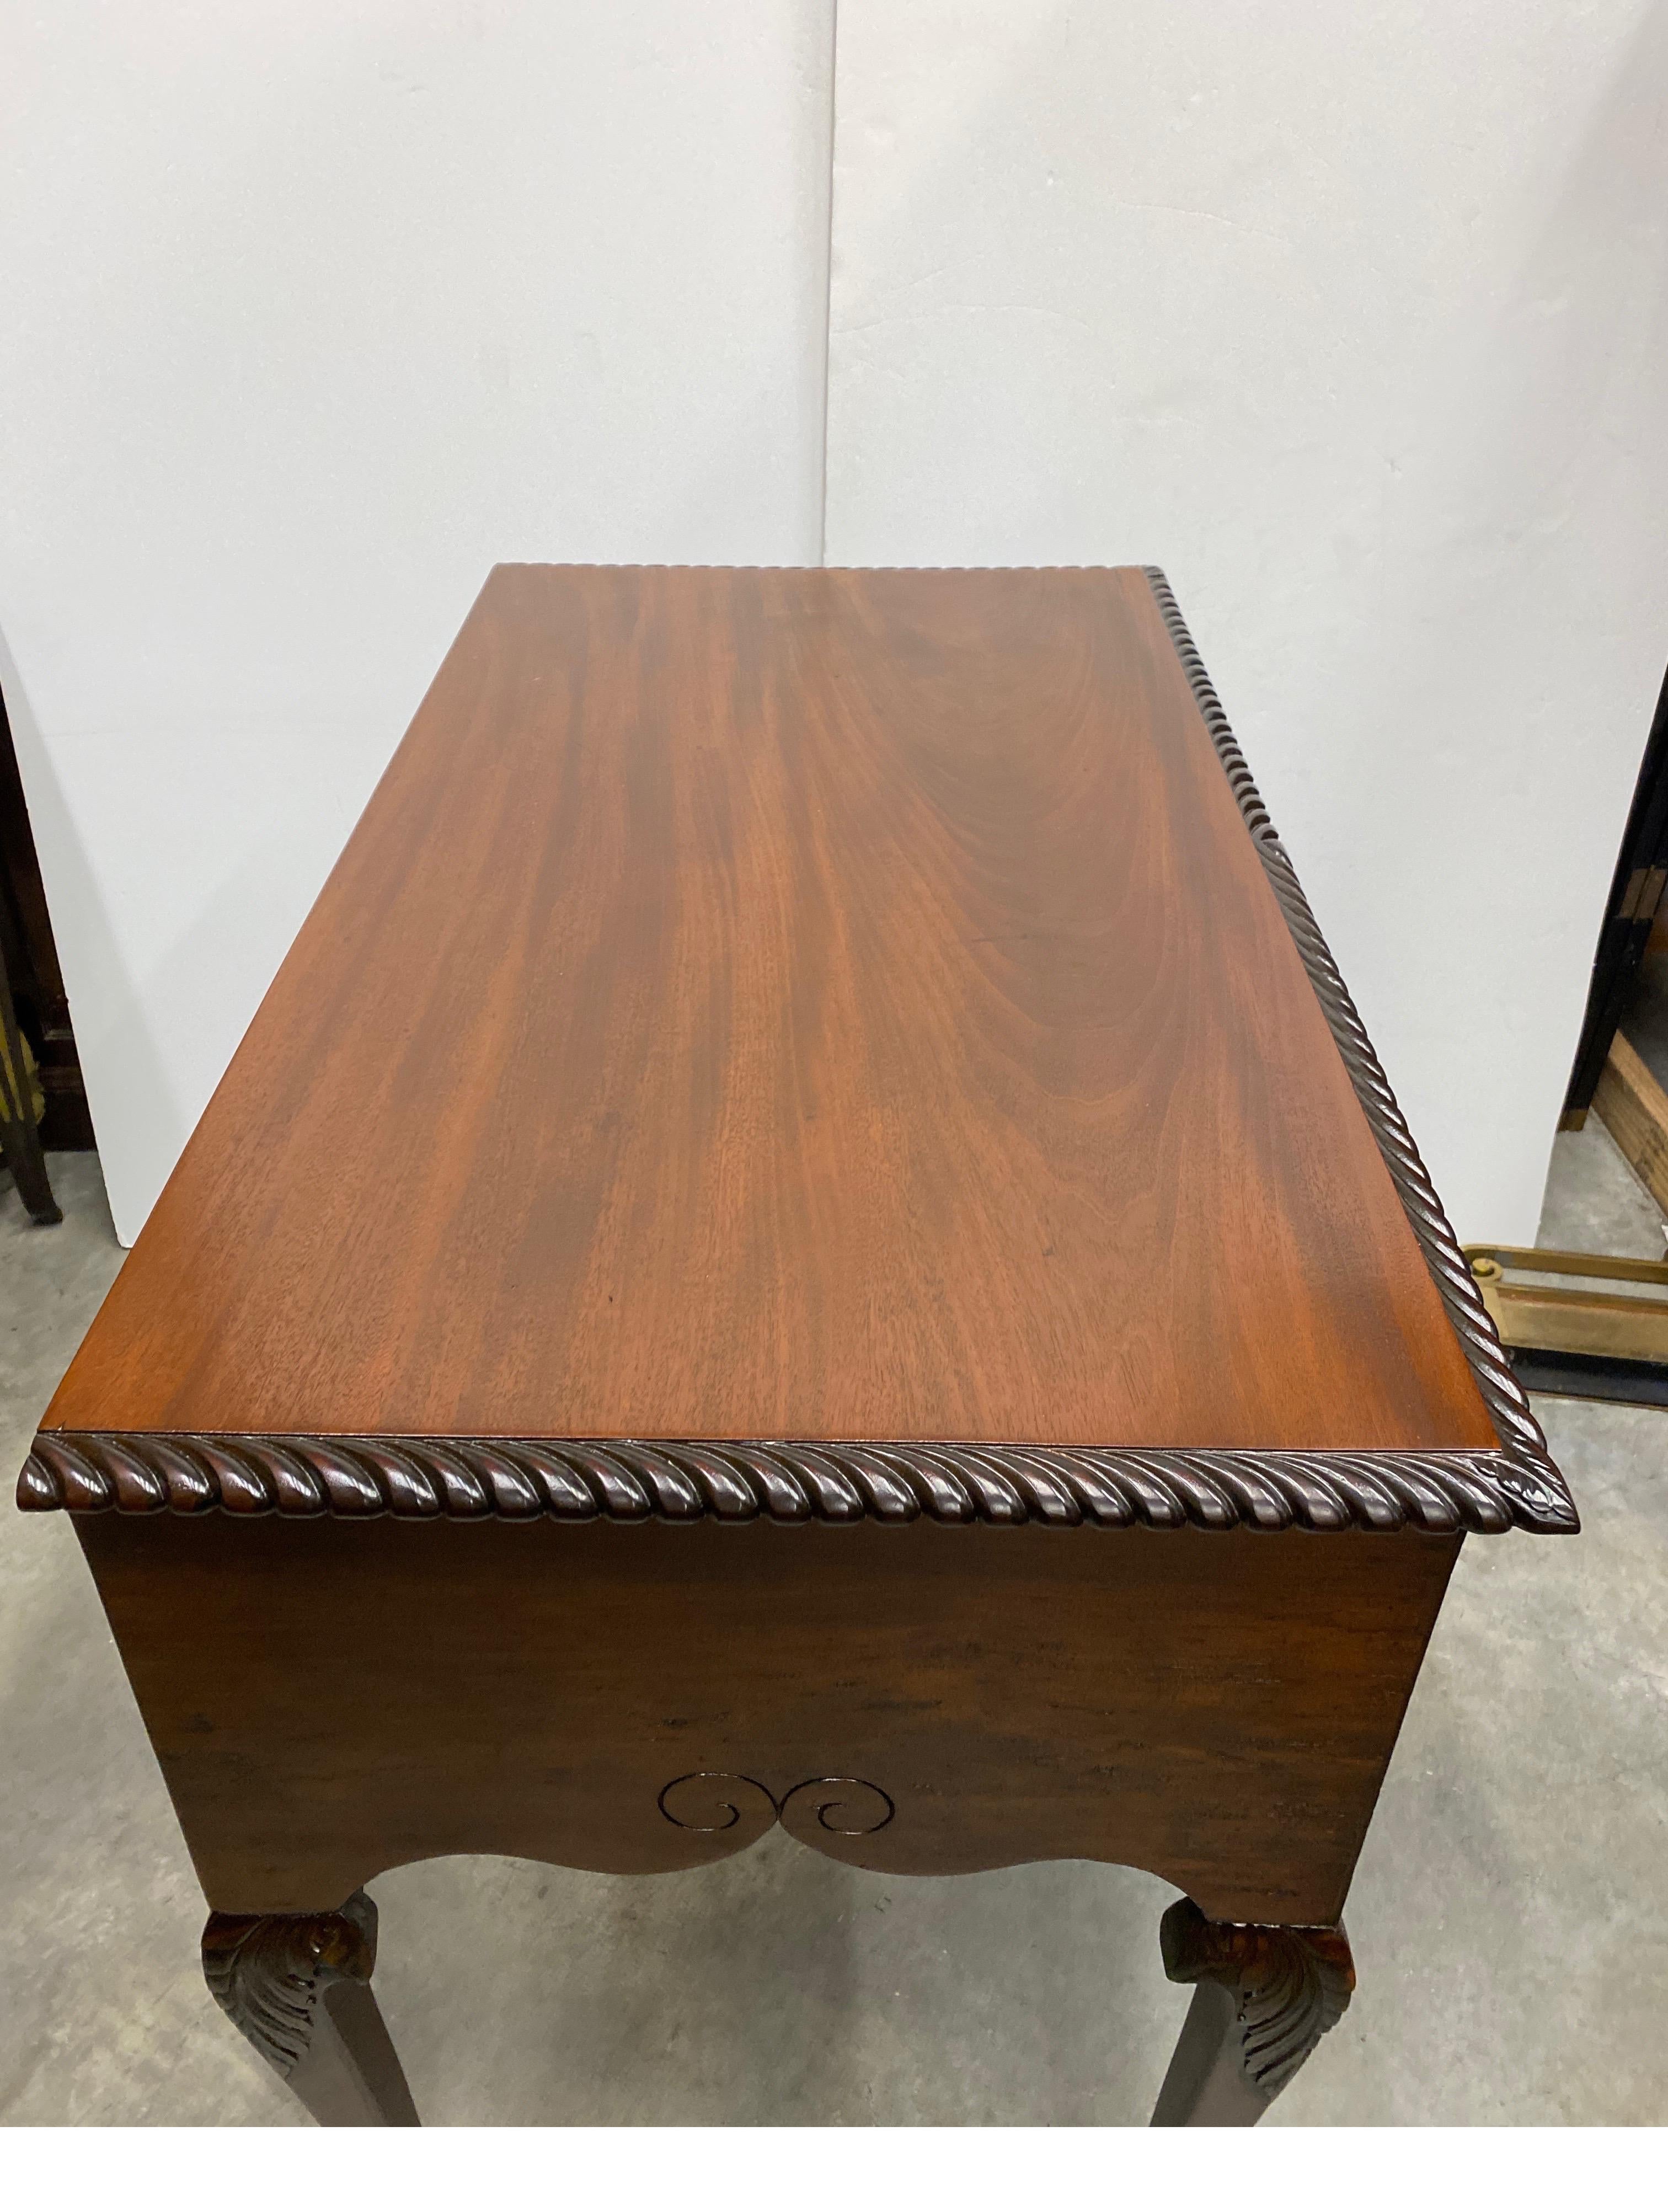 Antique Centennial Hand Carved Mahogany Lowboy In Excellent Condition For Sale In Lambertville, NJ